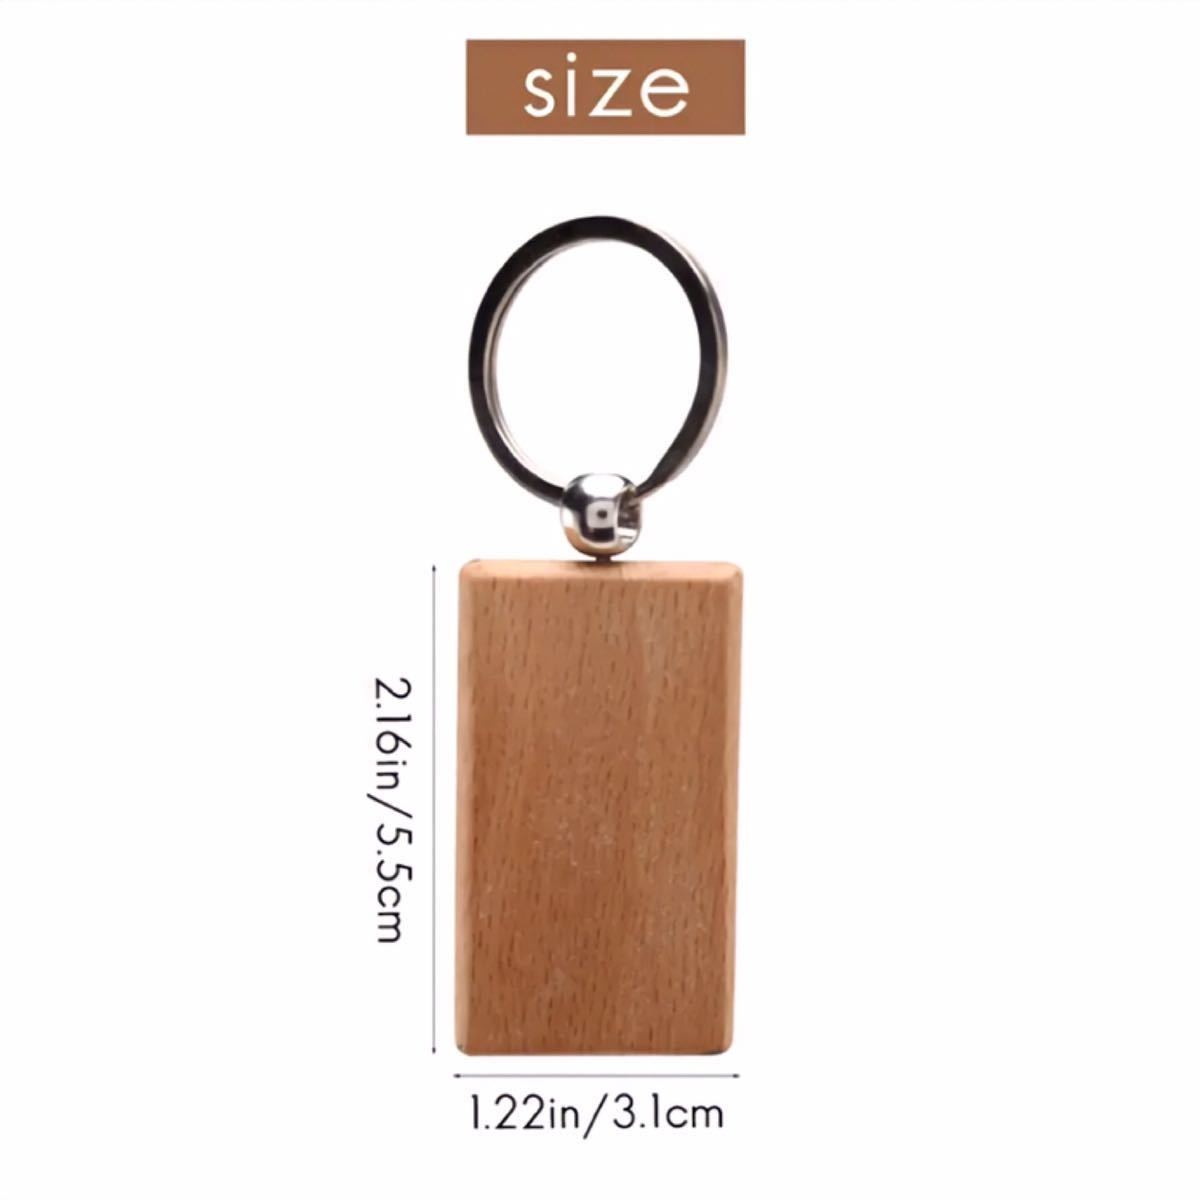  tolepainting key ring hand made handmade key holder interior material raw materials miscellaneous goods plain wood tree product paint work 